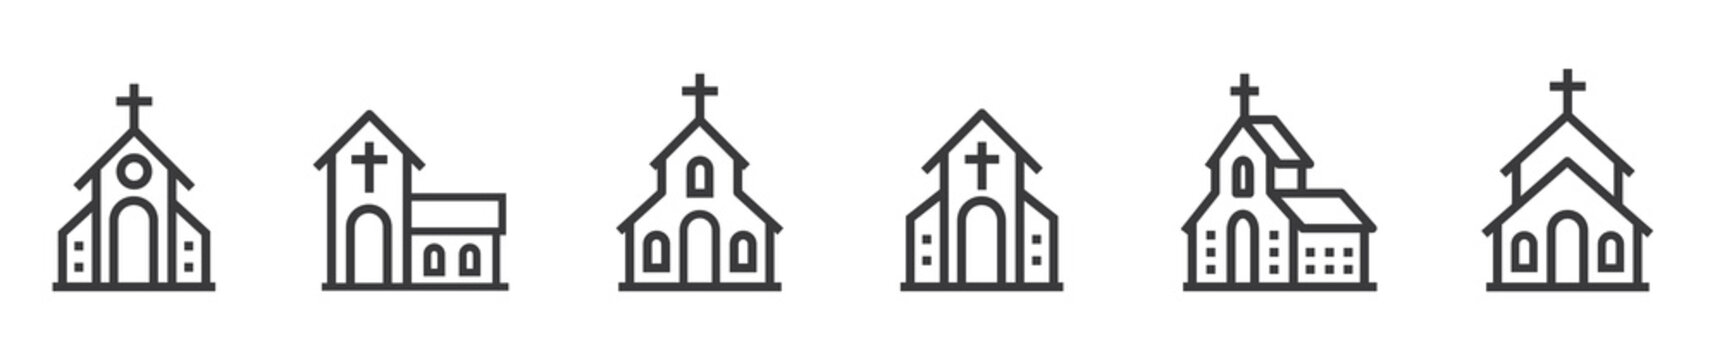 Church bulding line icon set. Icons of christian religion. Flat style - stock vector.